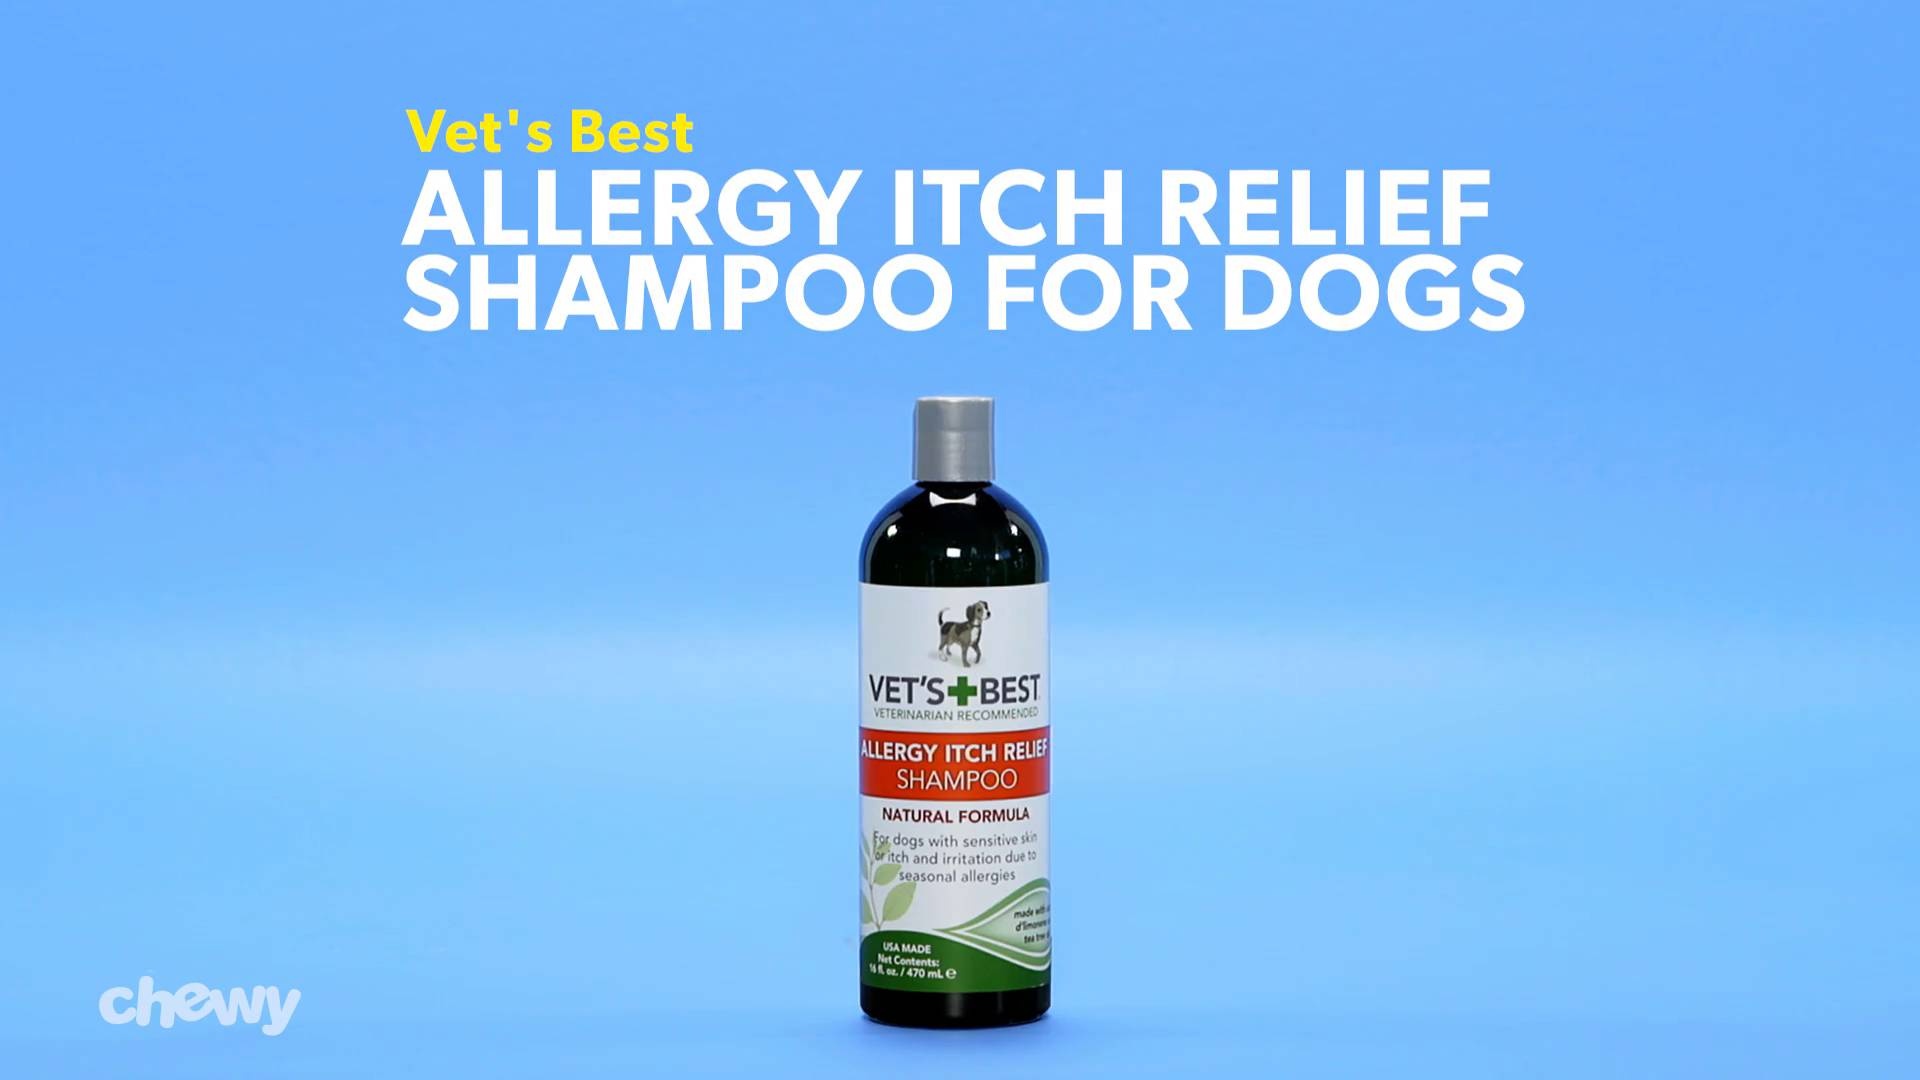 vet's best itch relief shampoo